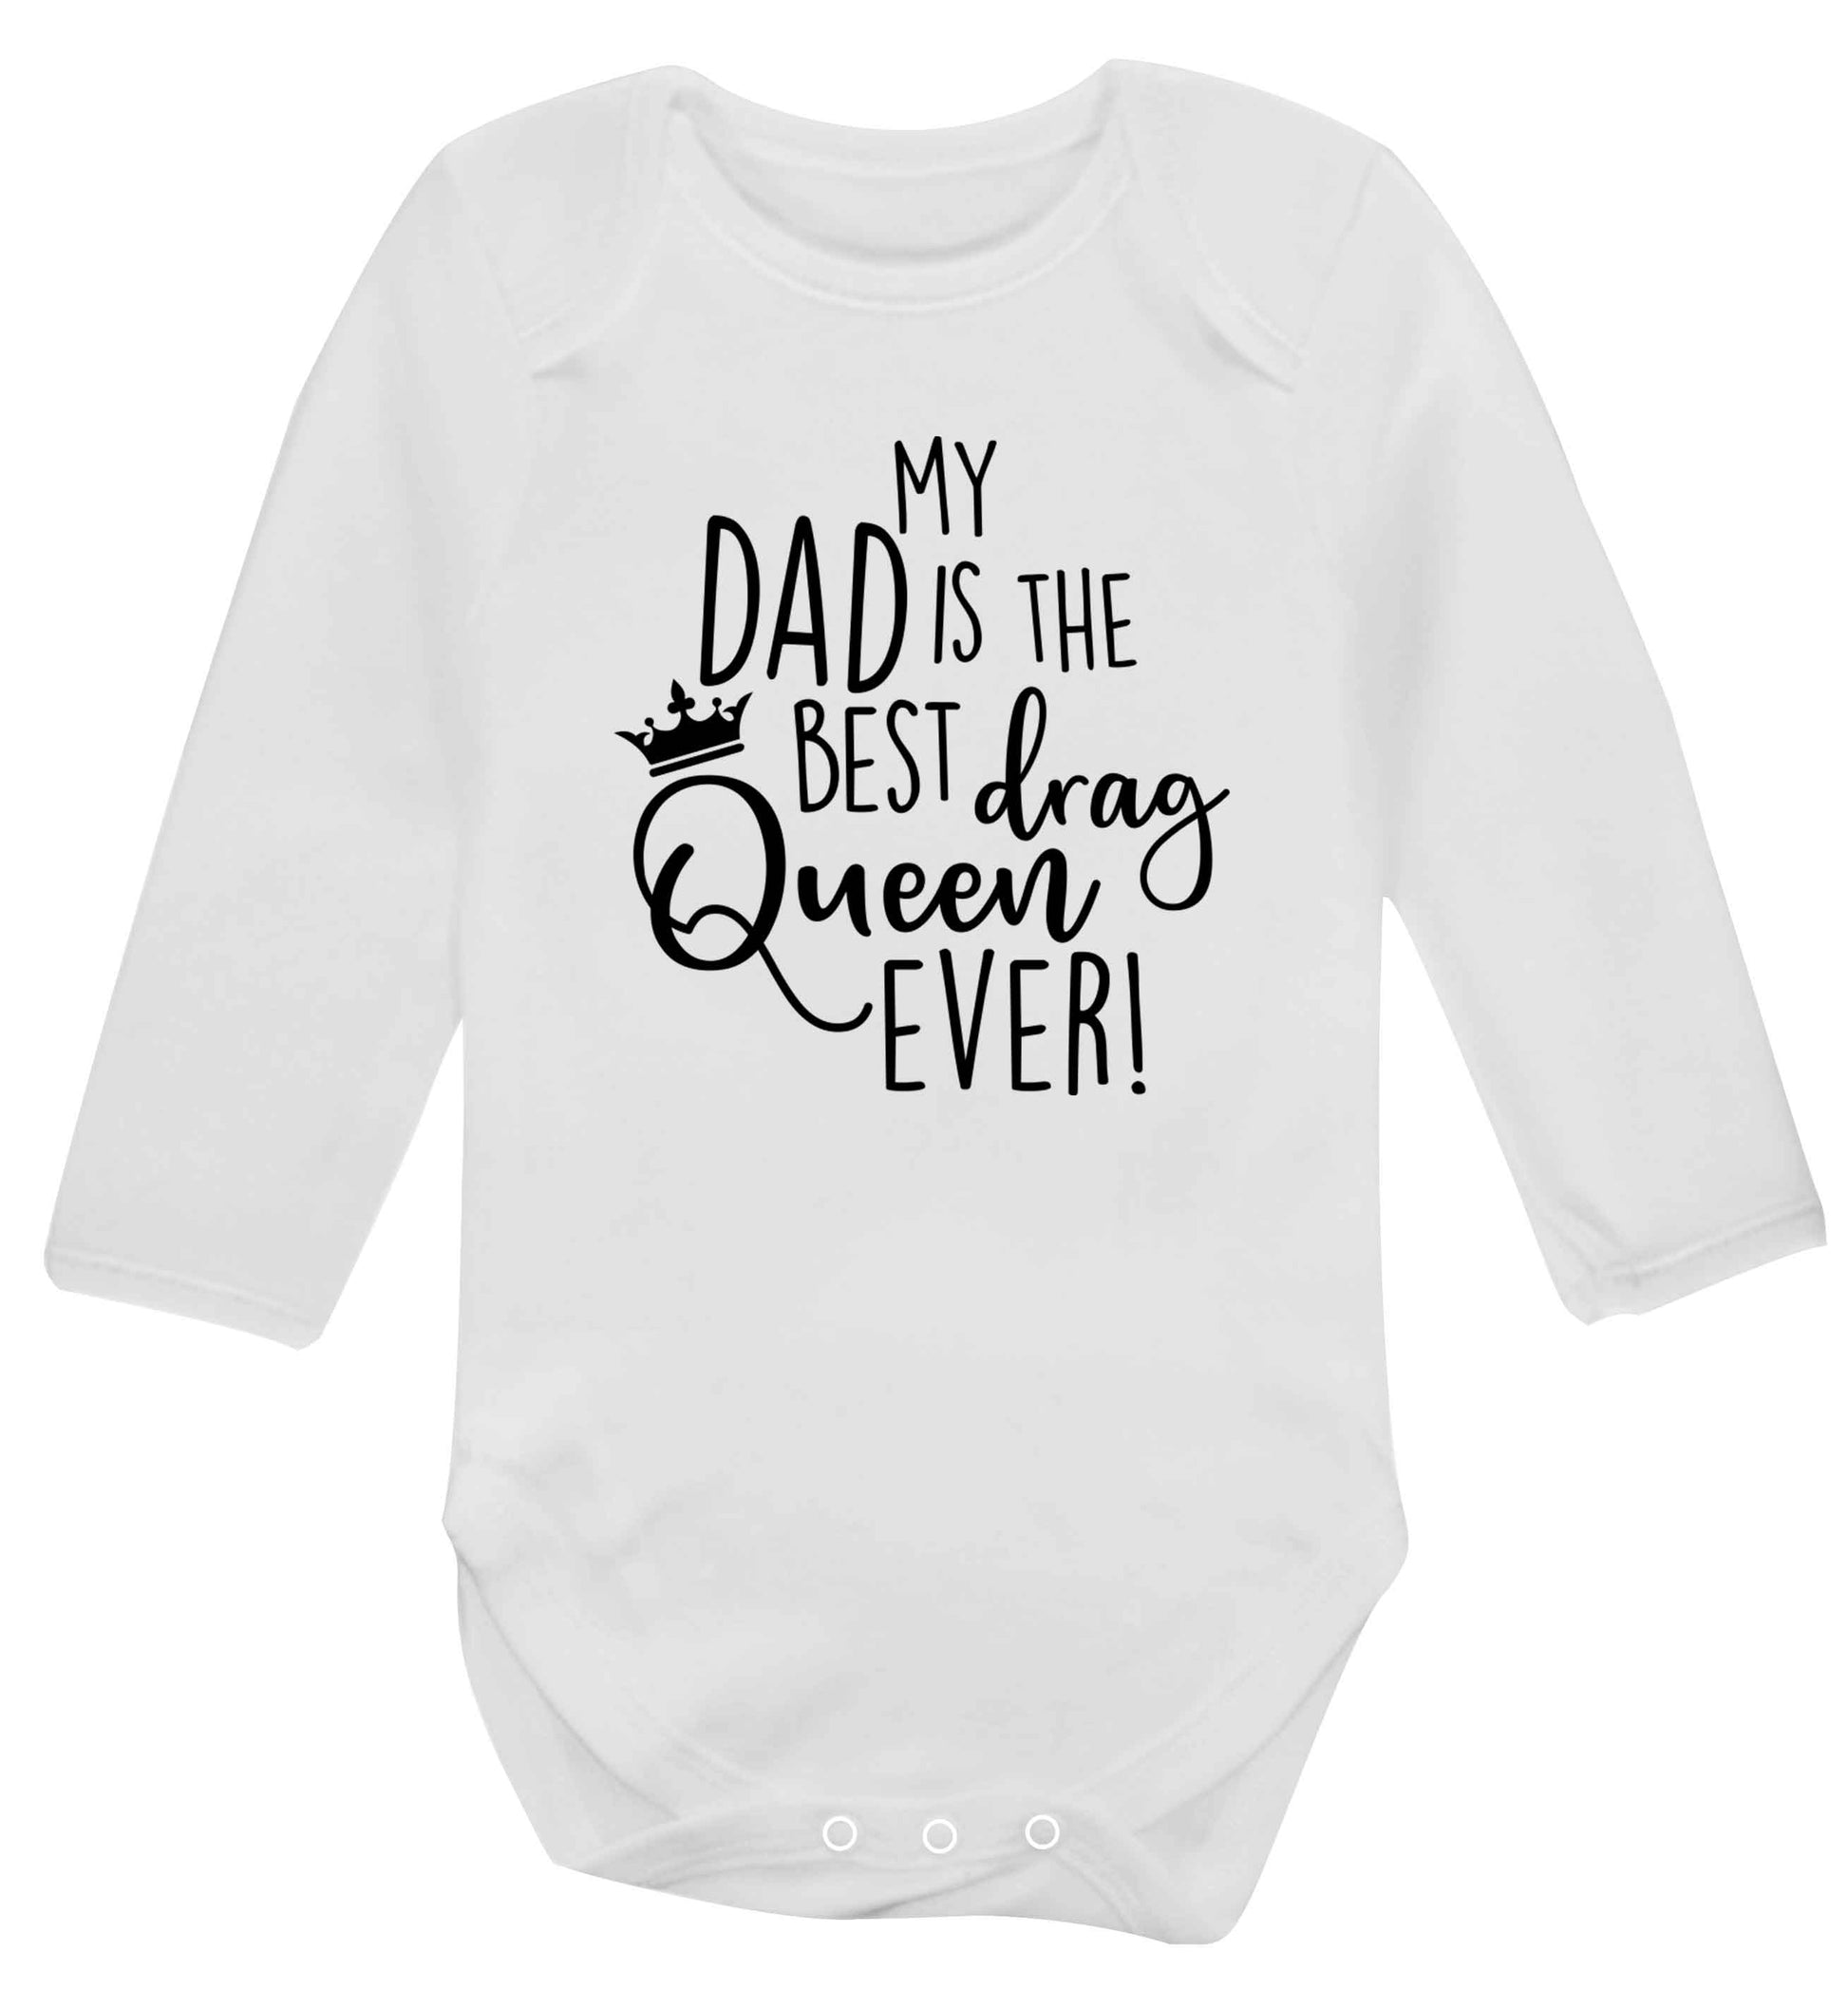 My dad is the best drag Queen ever Baby Vest long sleeved white 6-12 months